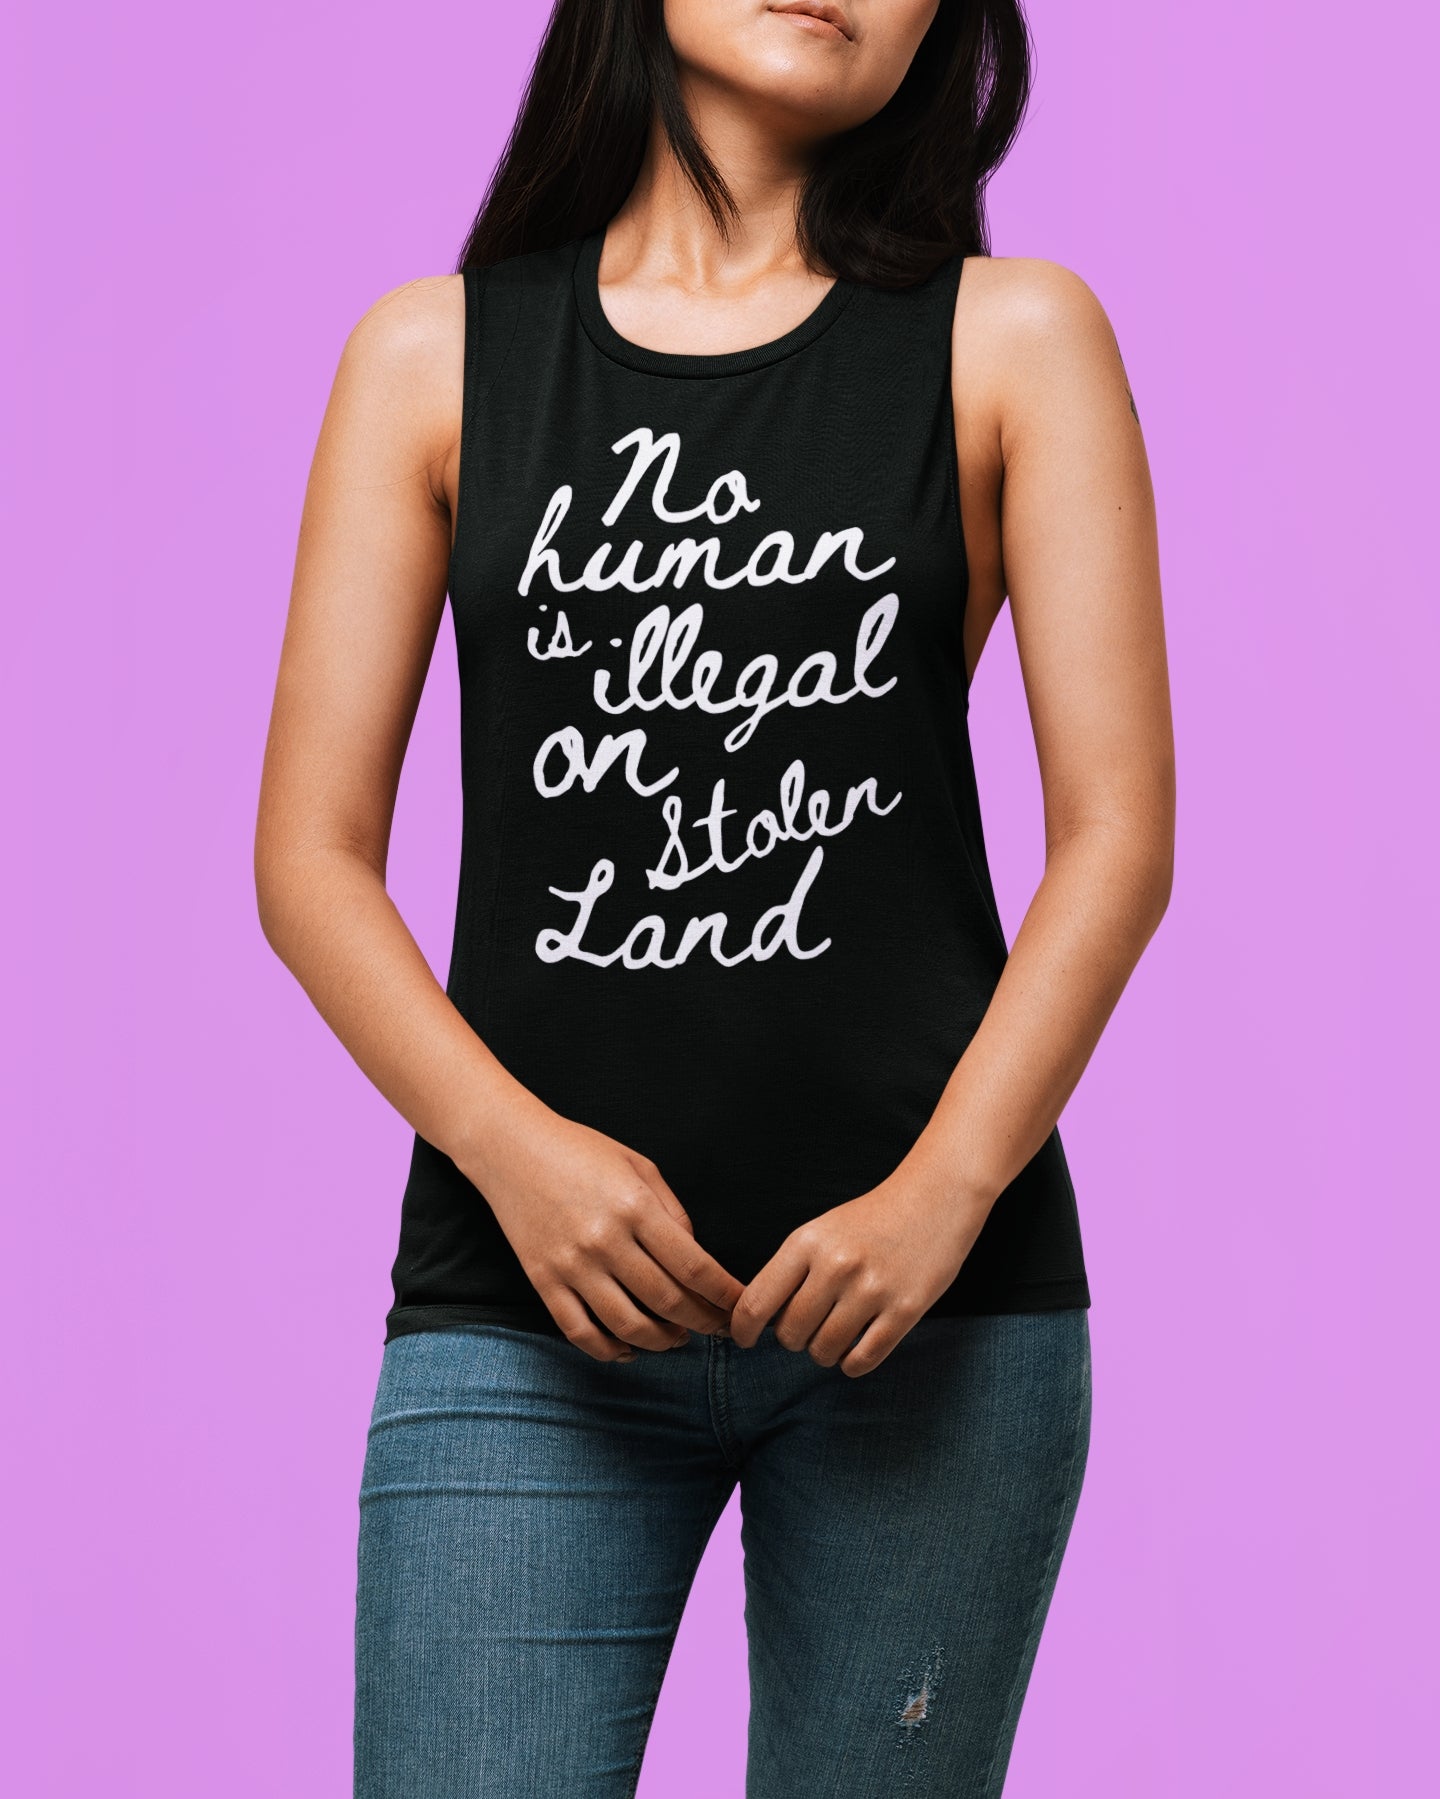 Women's black immigration activism sleeveless shirt with bold cursive that says 'No Human is illegal on stolen land'